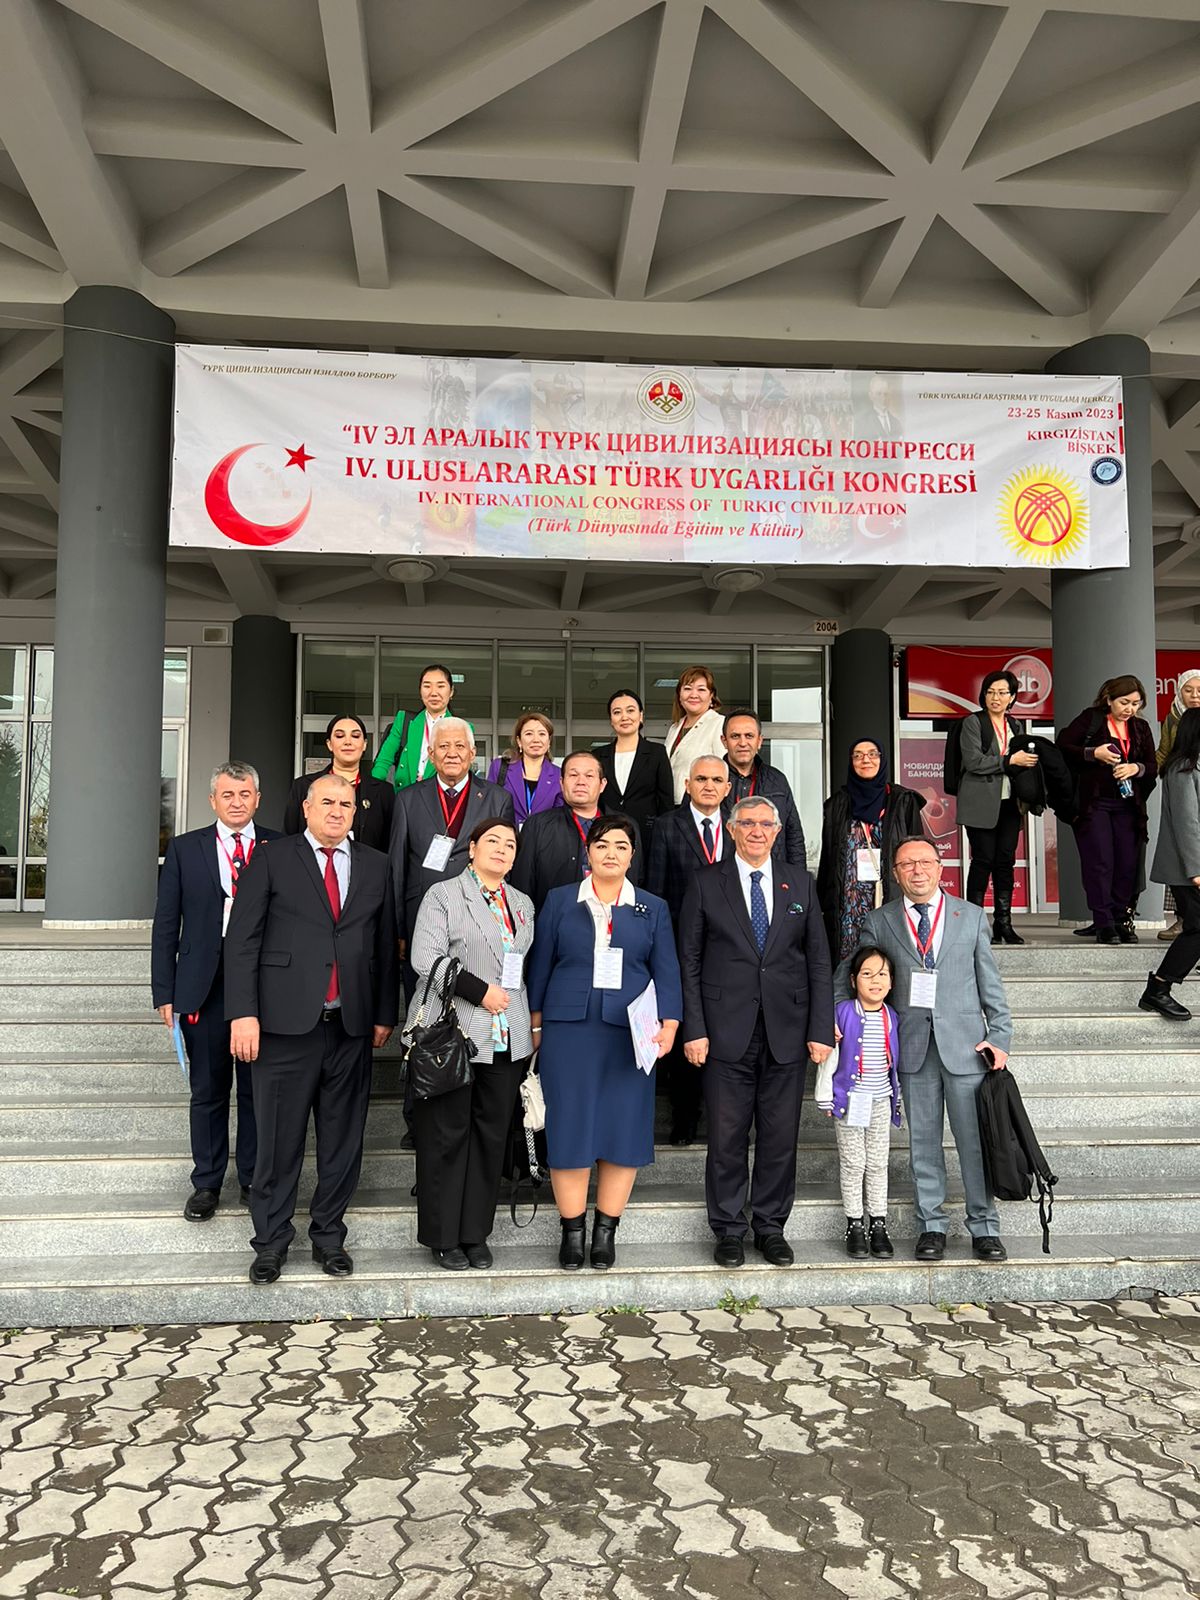 Conference of the Turkic World in Kyrgyzstan